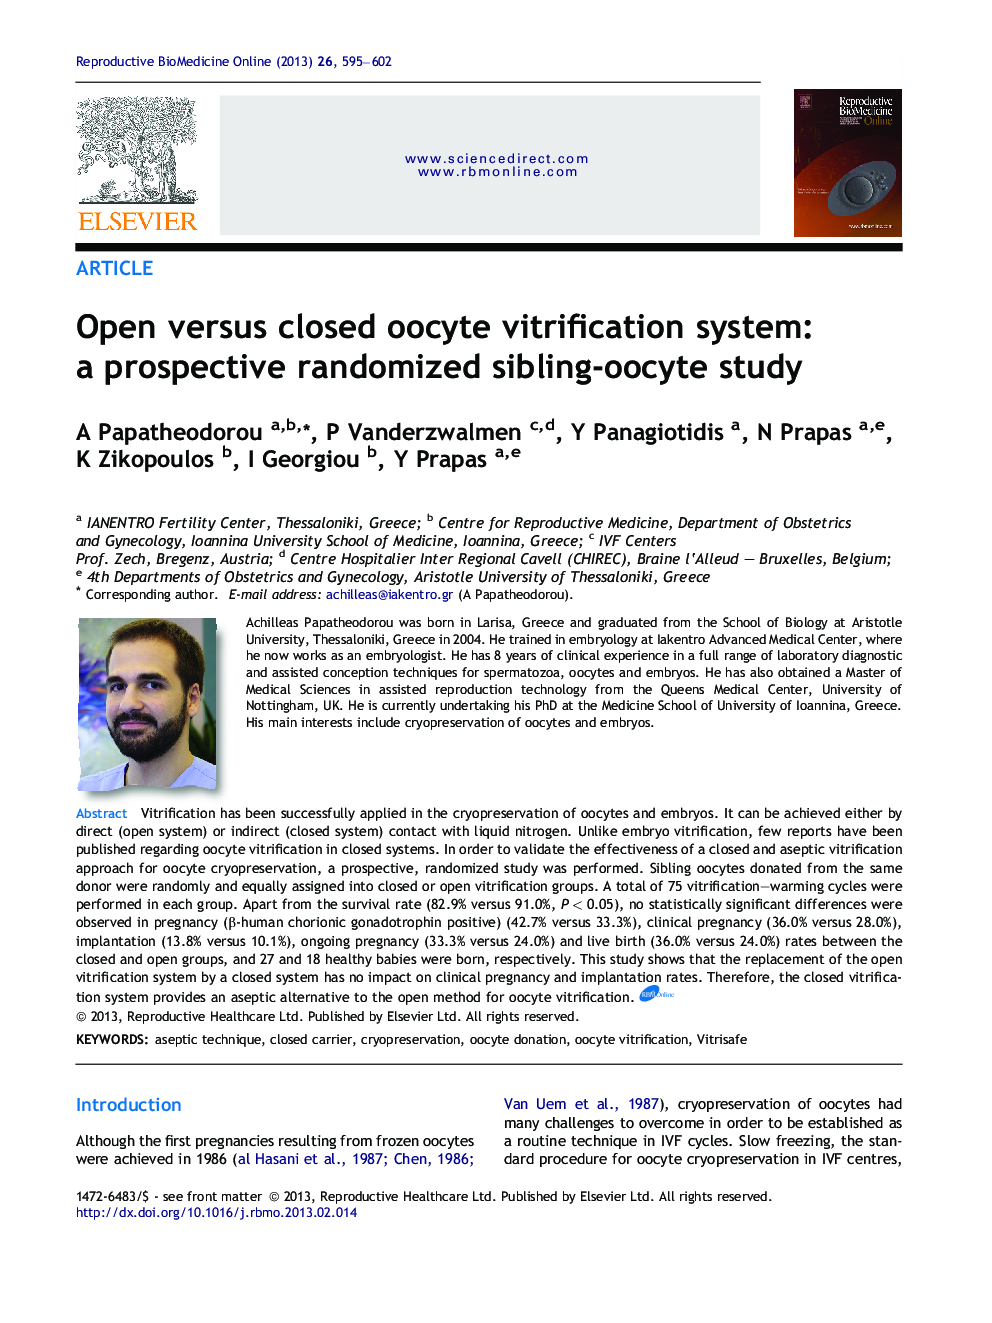 Open versus closed oocyte vitrification system: a prospective randomized sibling-oocyte study